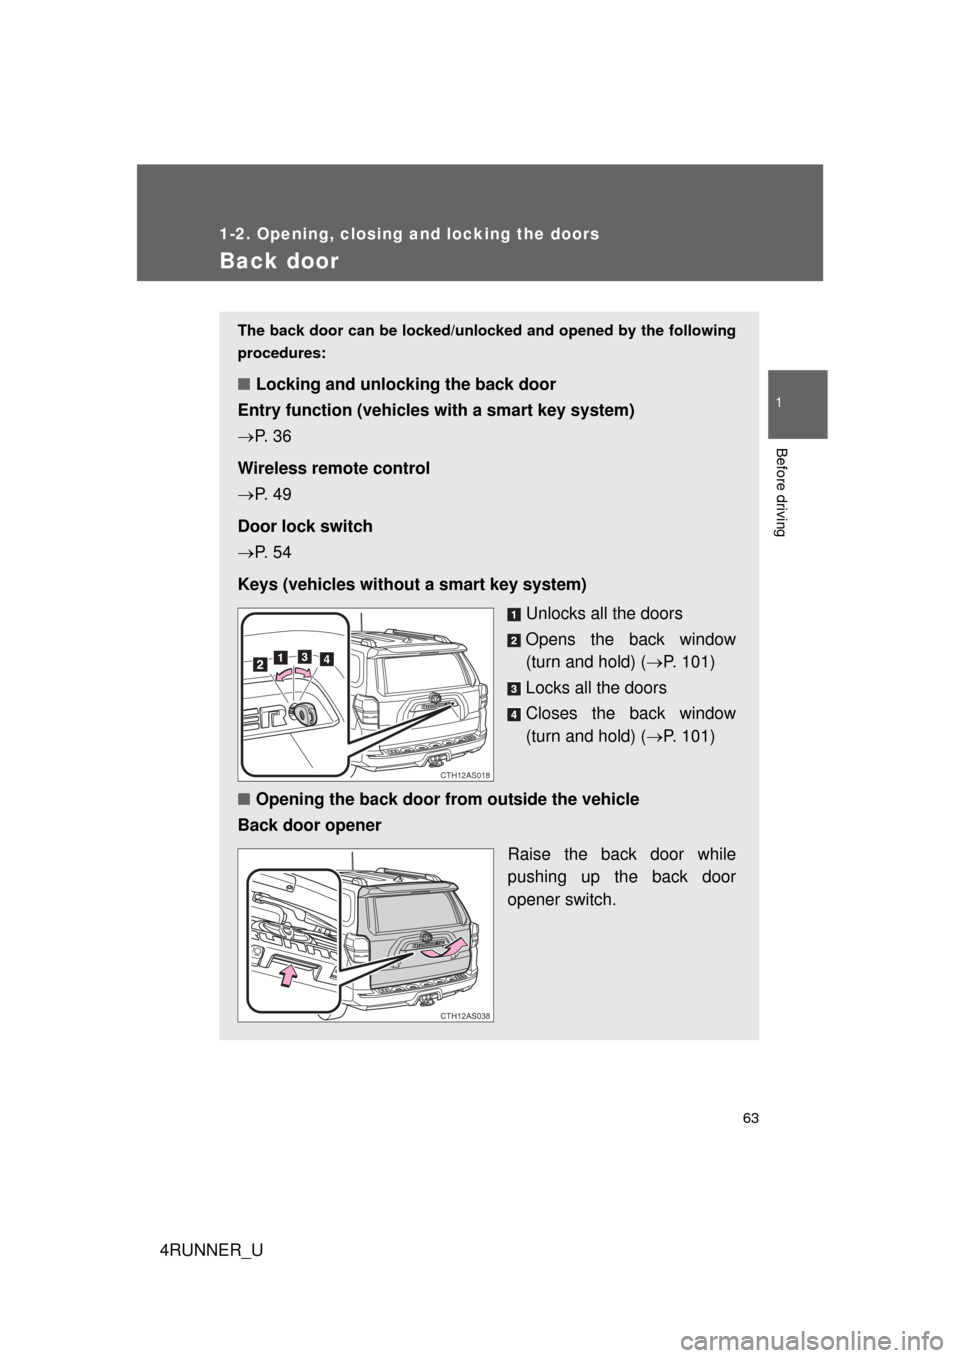 TOYOTA 4RUNNER 2012 N280 / 5.G User Guide 63
1
1-2. Opening, closing and locking the doors
Before driving
4RUNNER_U
Back door
The back door can be locked/unlocked and opened by the following
procedures:
■ Locking and unlocking the back door